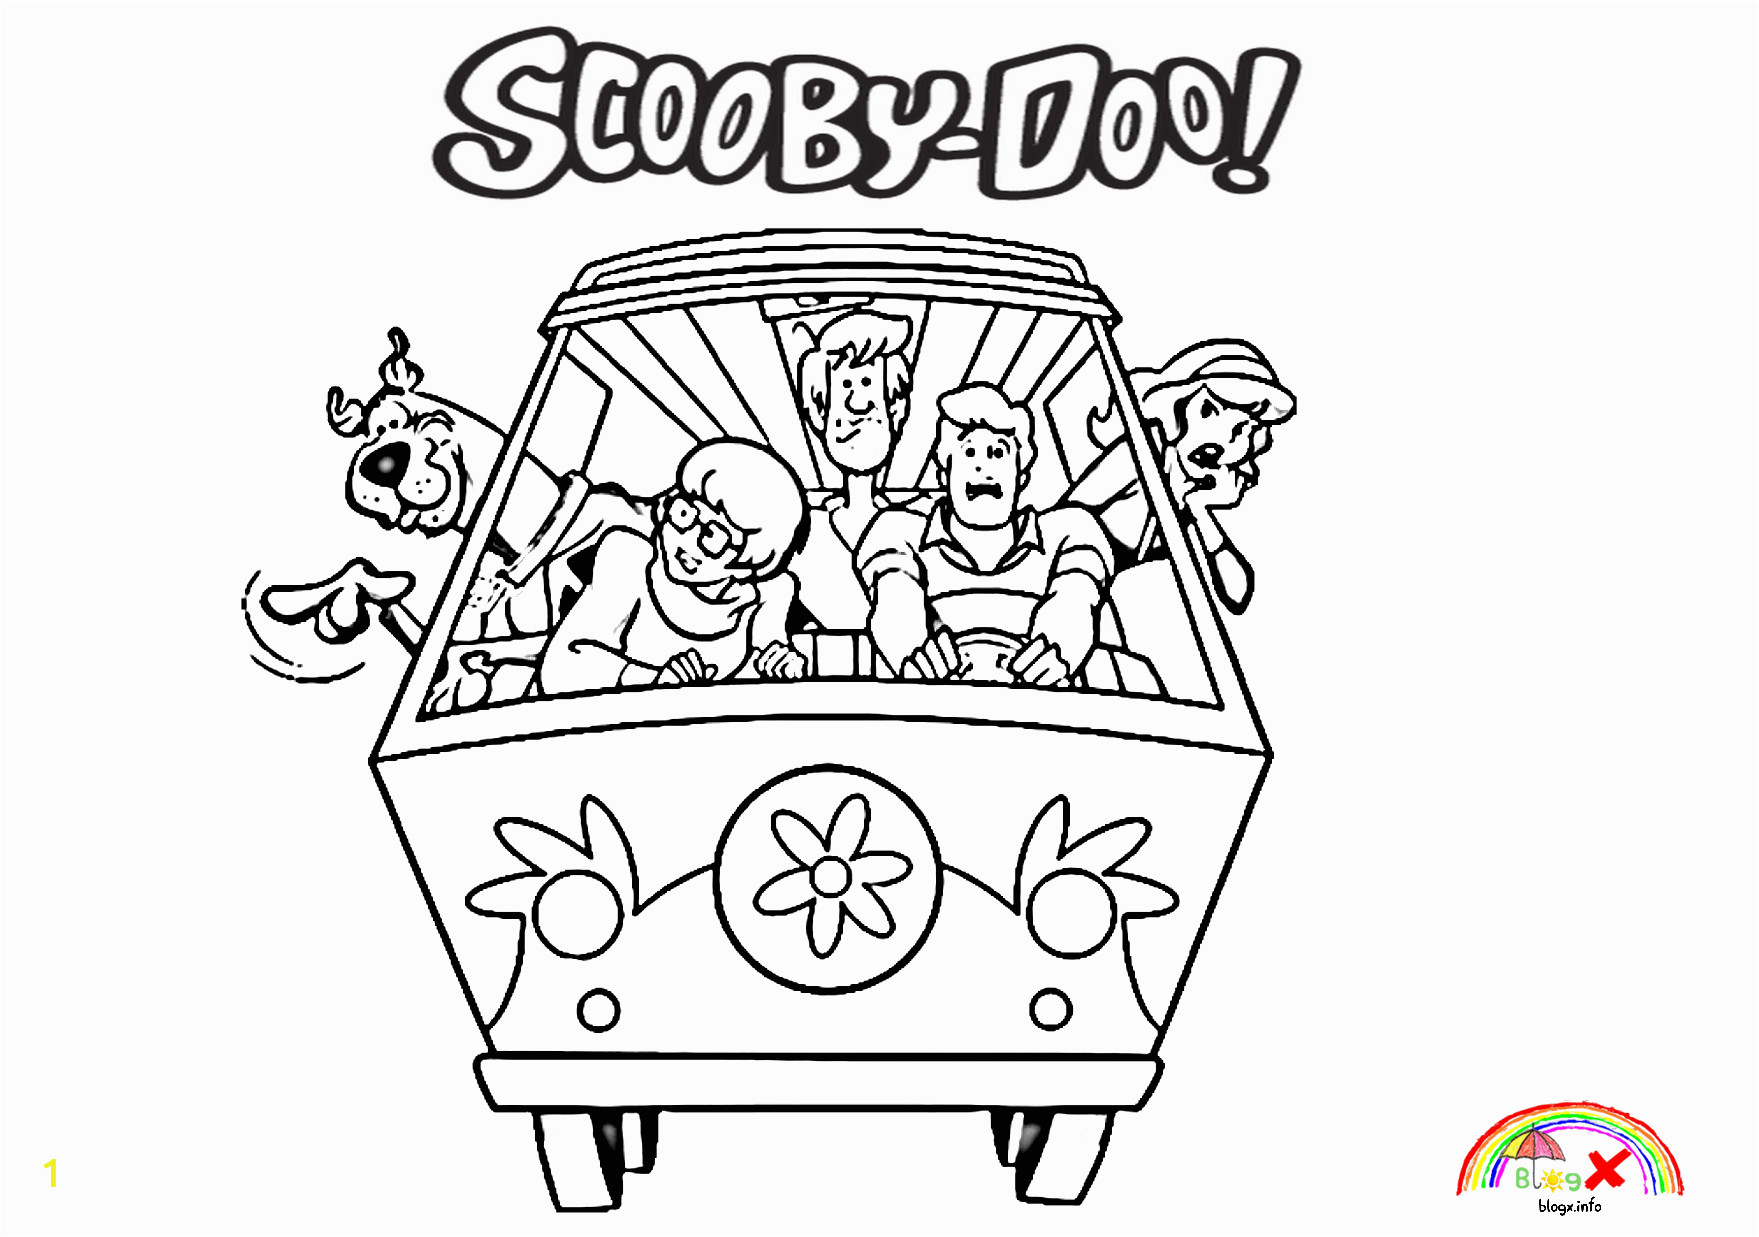 scooby doo and the mystery machine coloring page